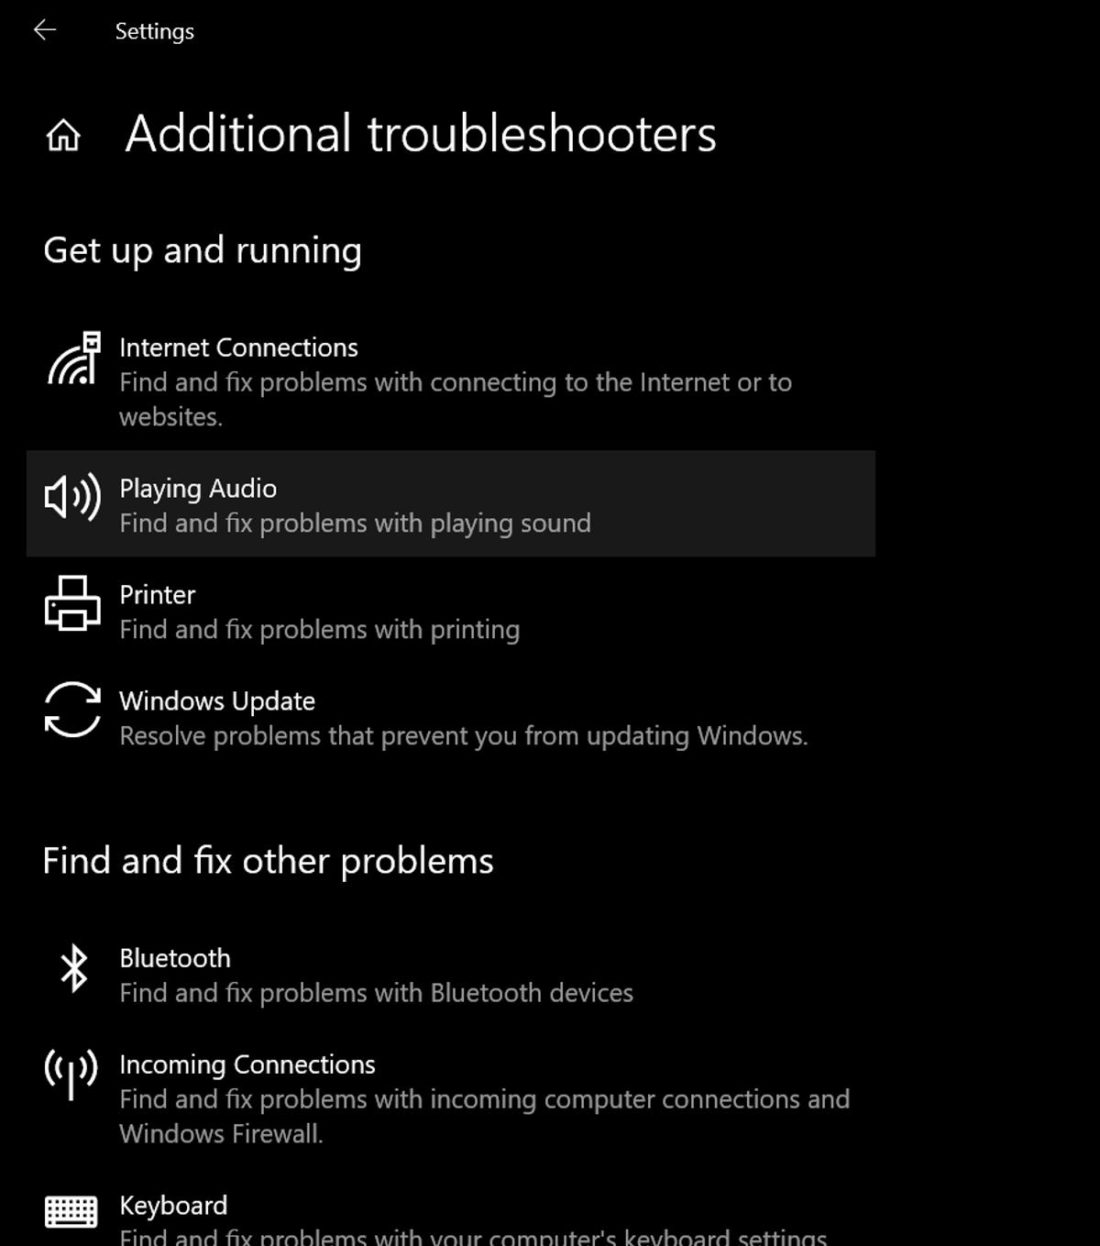 additional troubleshooters window with playing audio item highlighted